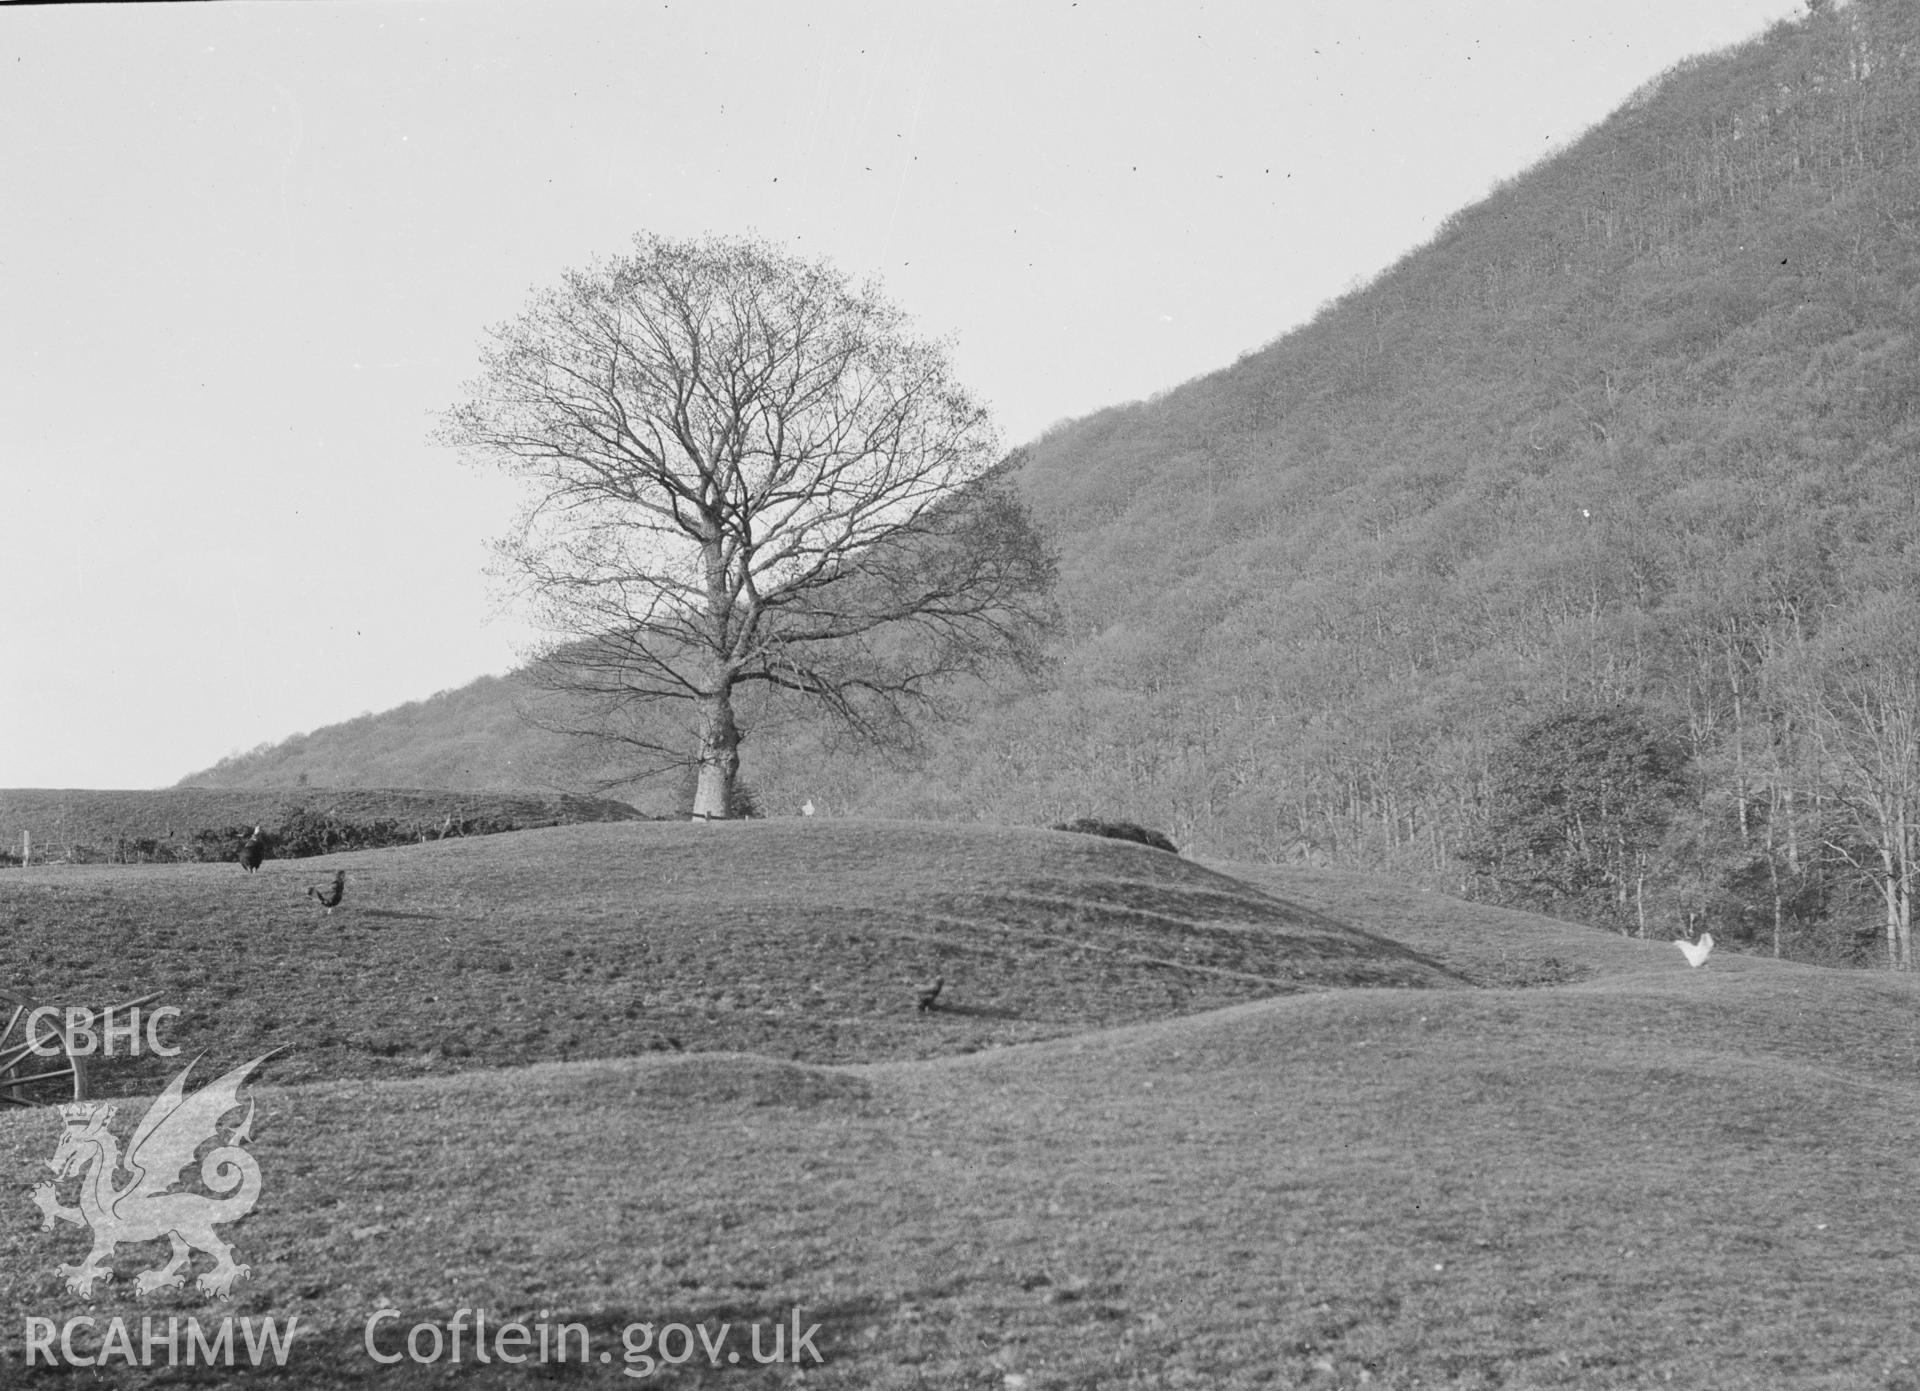 Digital copy of a nitrate negative showing view of Sycharth Castle Mound, taken by Leonard Monroe.